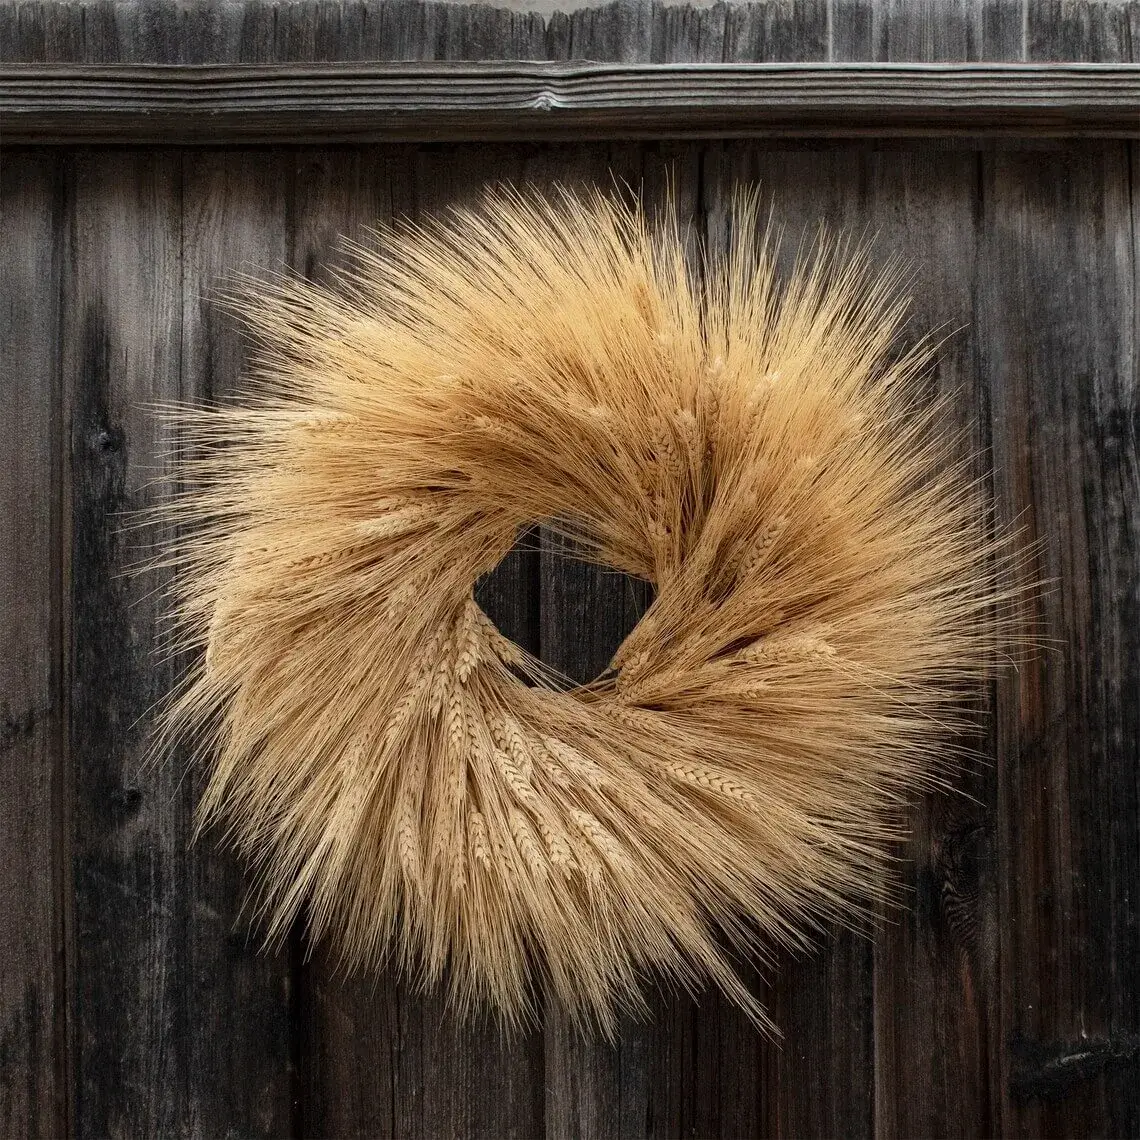 dried wheat wreath on the wooden wall